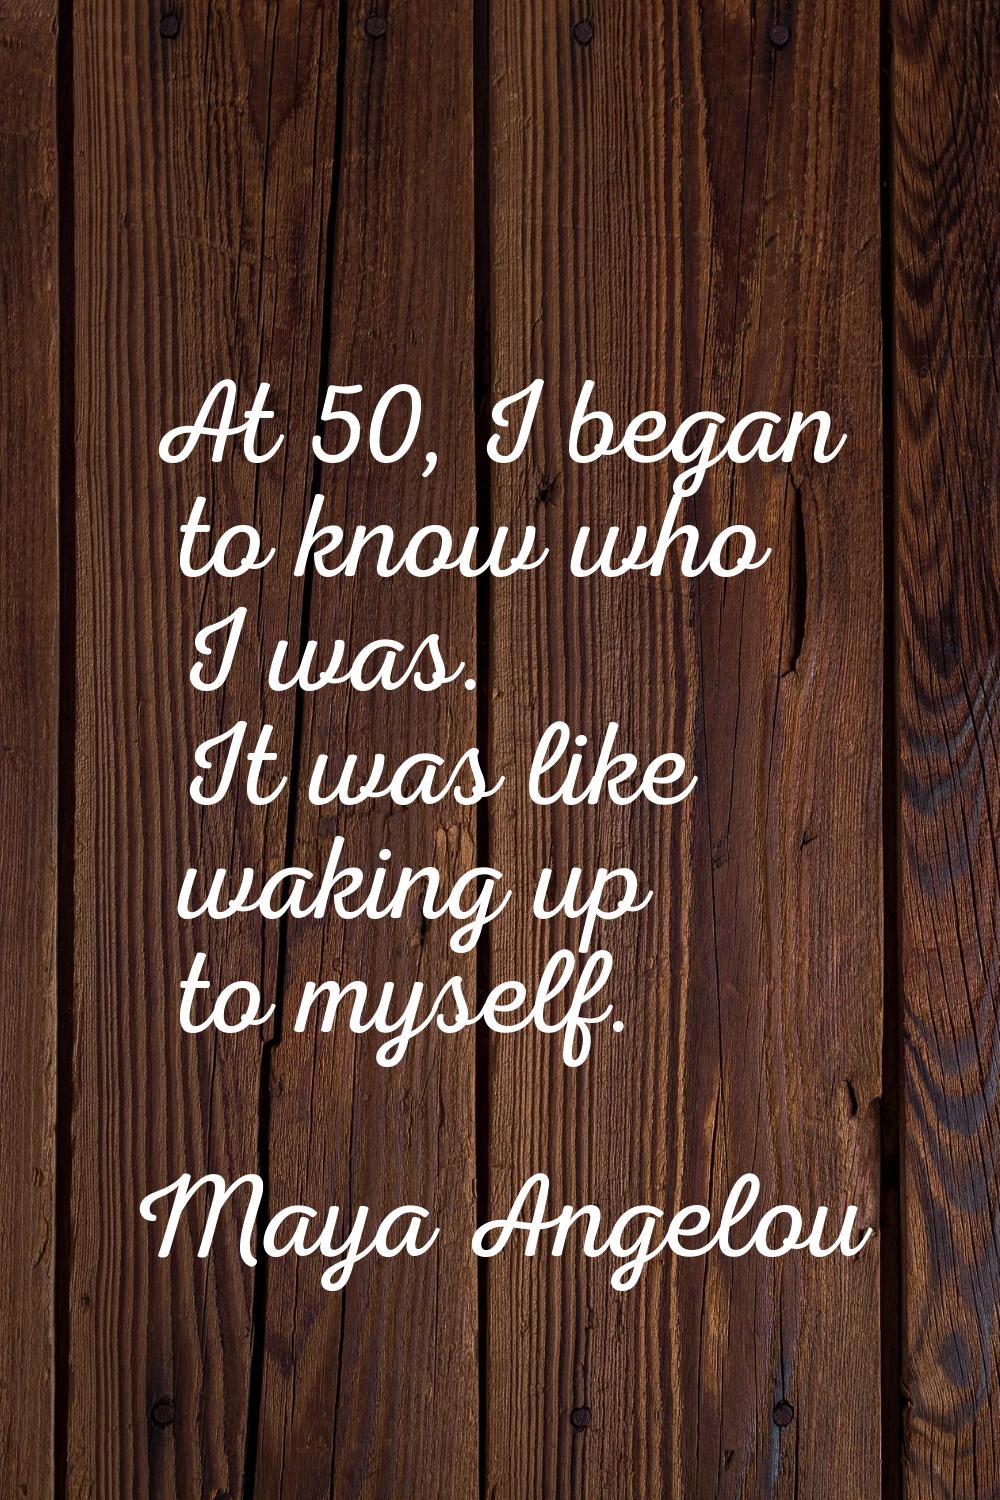 At 50, I began to know who I was. It was like waking up to myself.